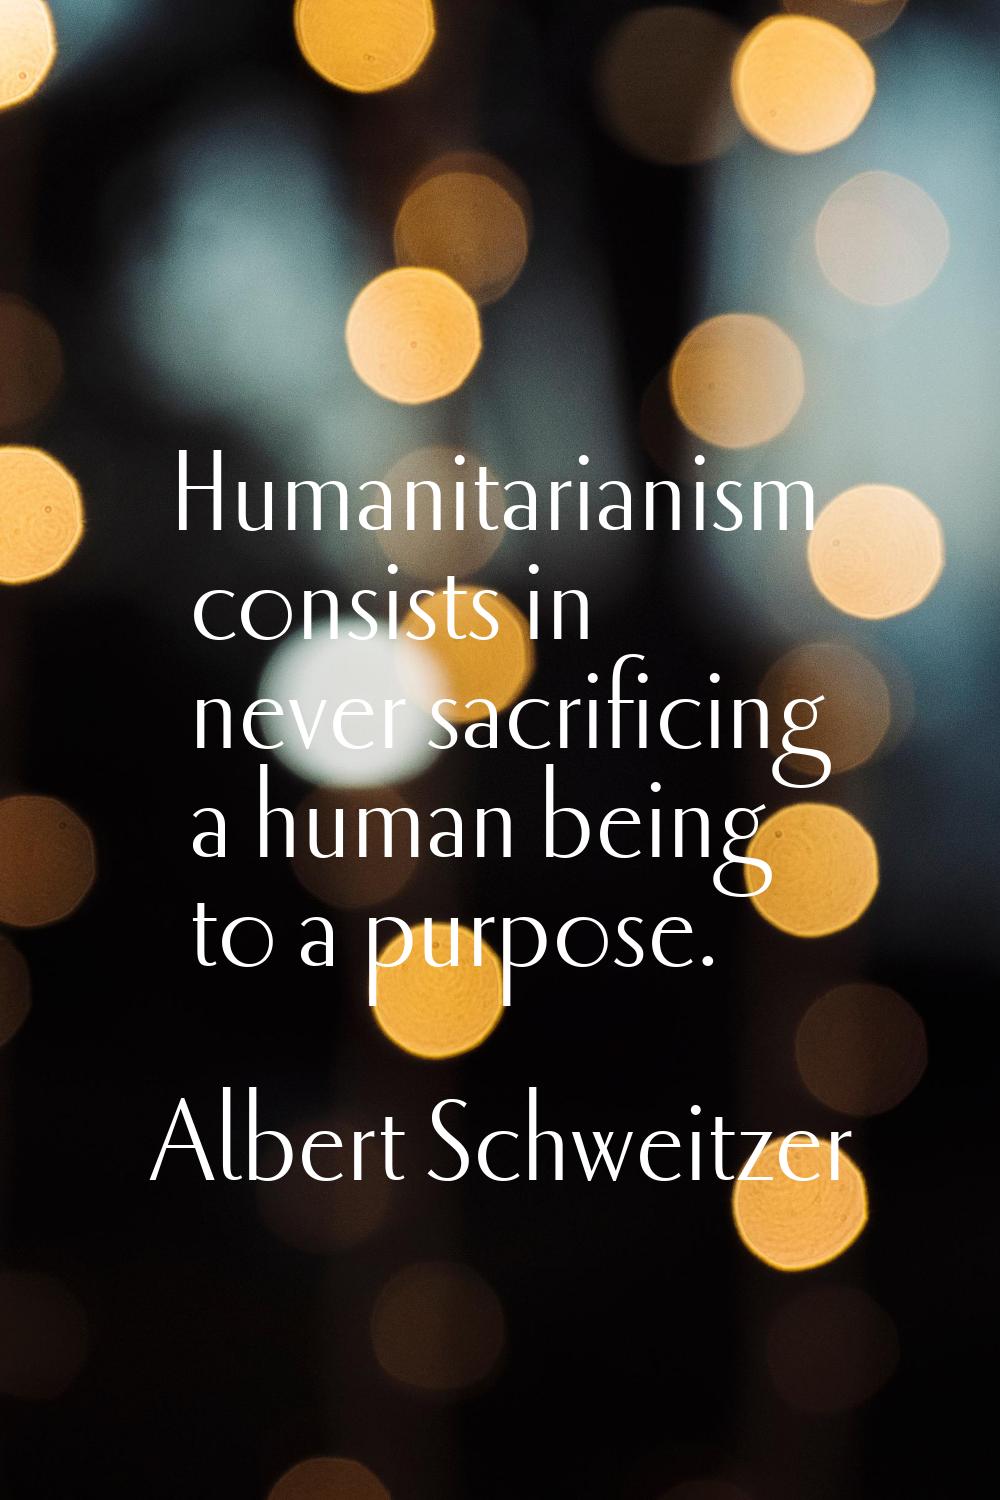 Humanitarianism consists in never sacrificing a human being to a purpose.